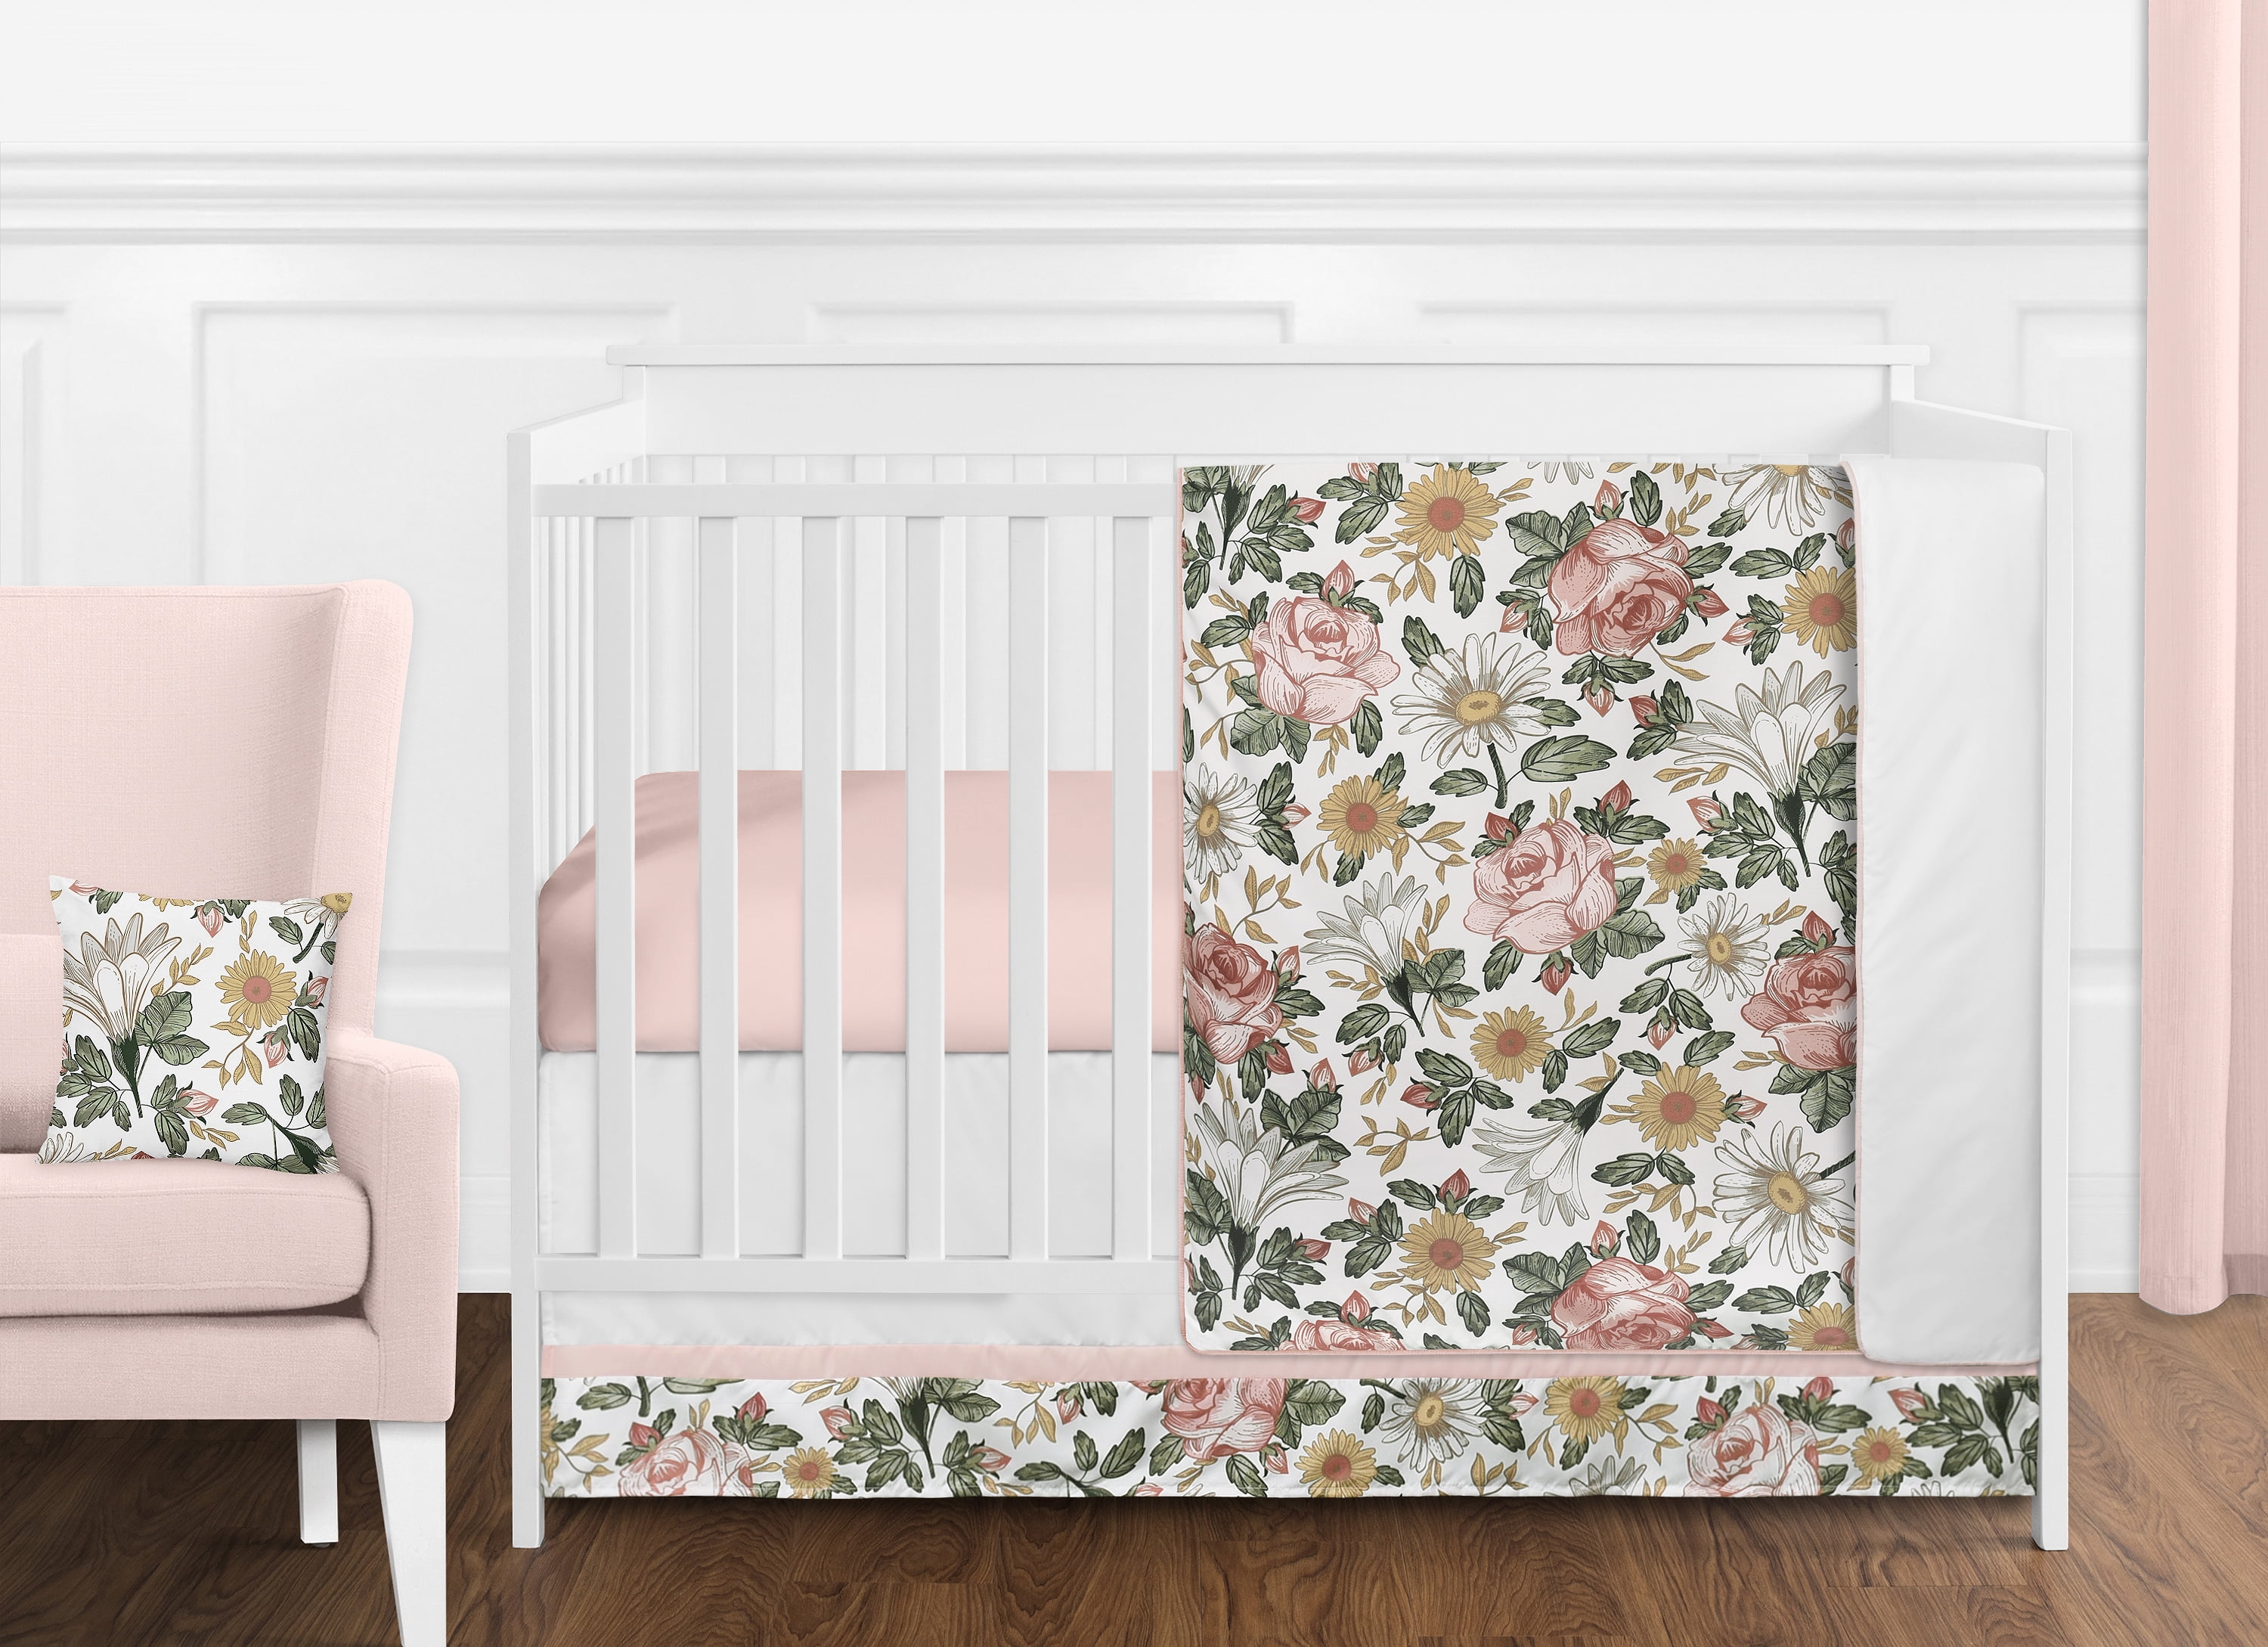 Nursery Yellow Blush Pink Green and White Shabby Chic Rose Flower Farmhouse Wildflower and Kids Sweet Jojo Designs Vintage Floral Boho Wall Art Prints Room Decor for Baby Set of 4